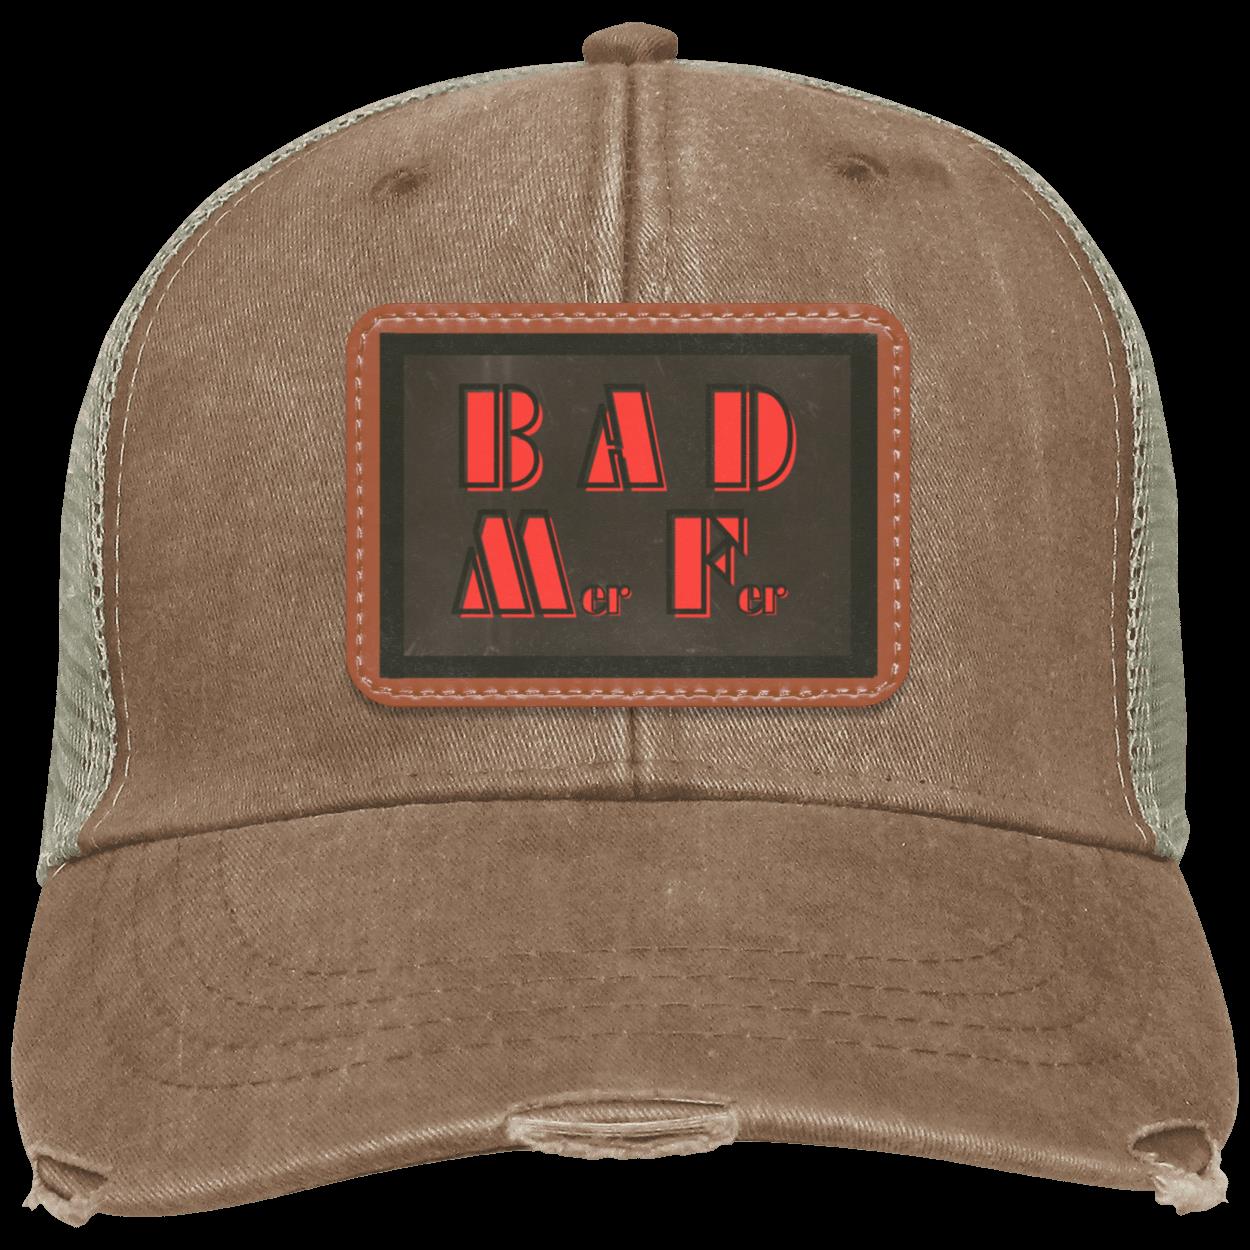 "BAD M-er  F-er" Distressed Snap Back , Trucker Hat, Tan and Gray Patch